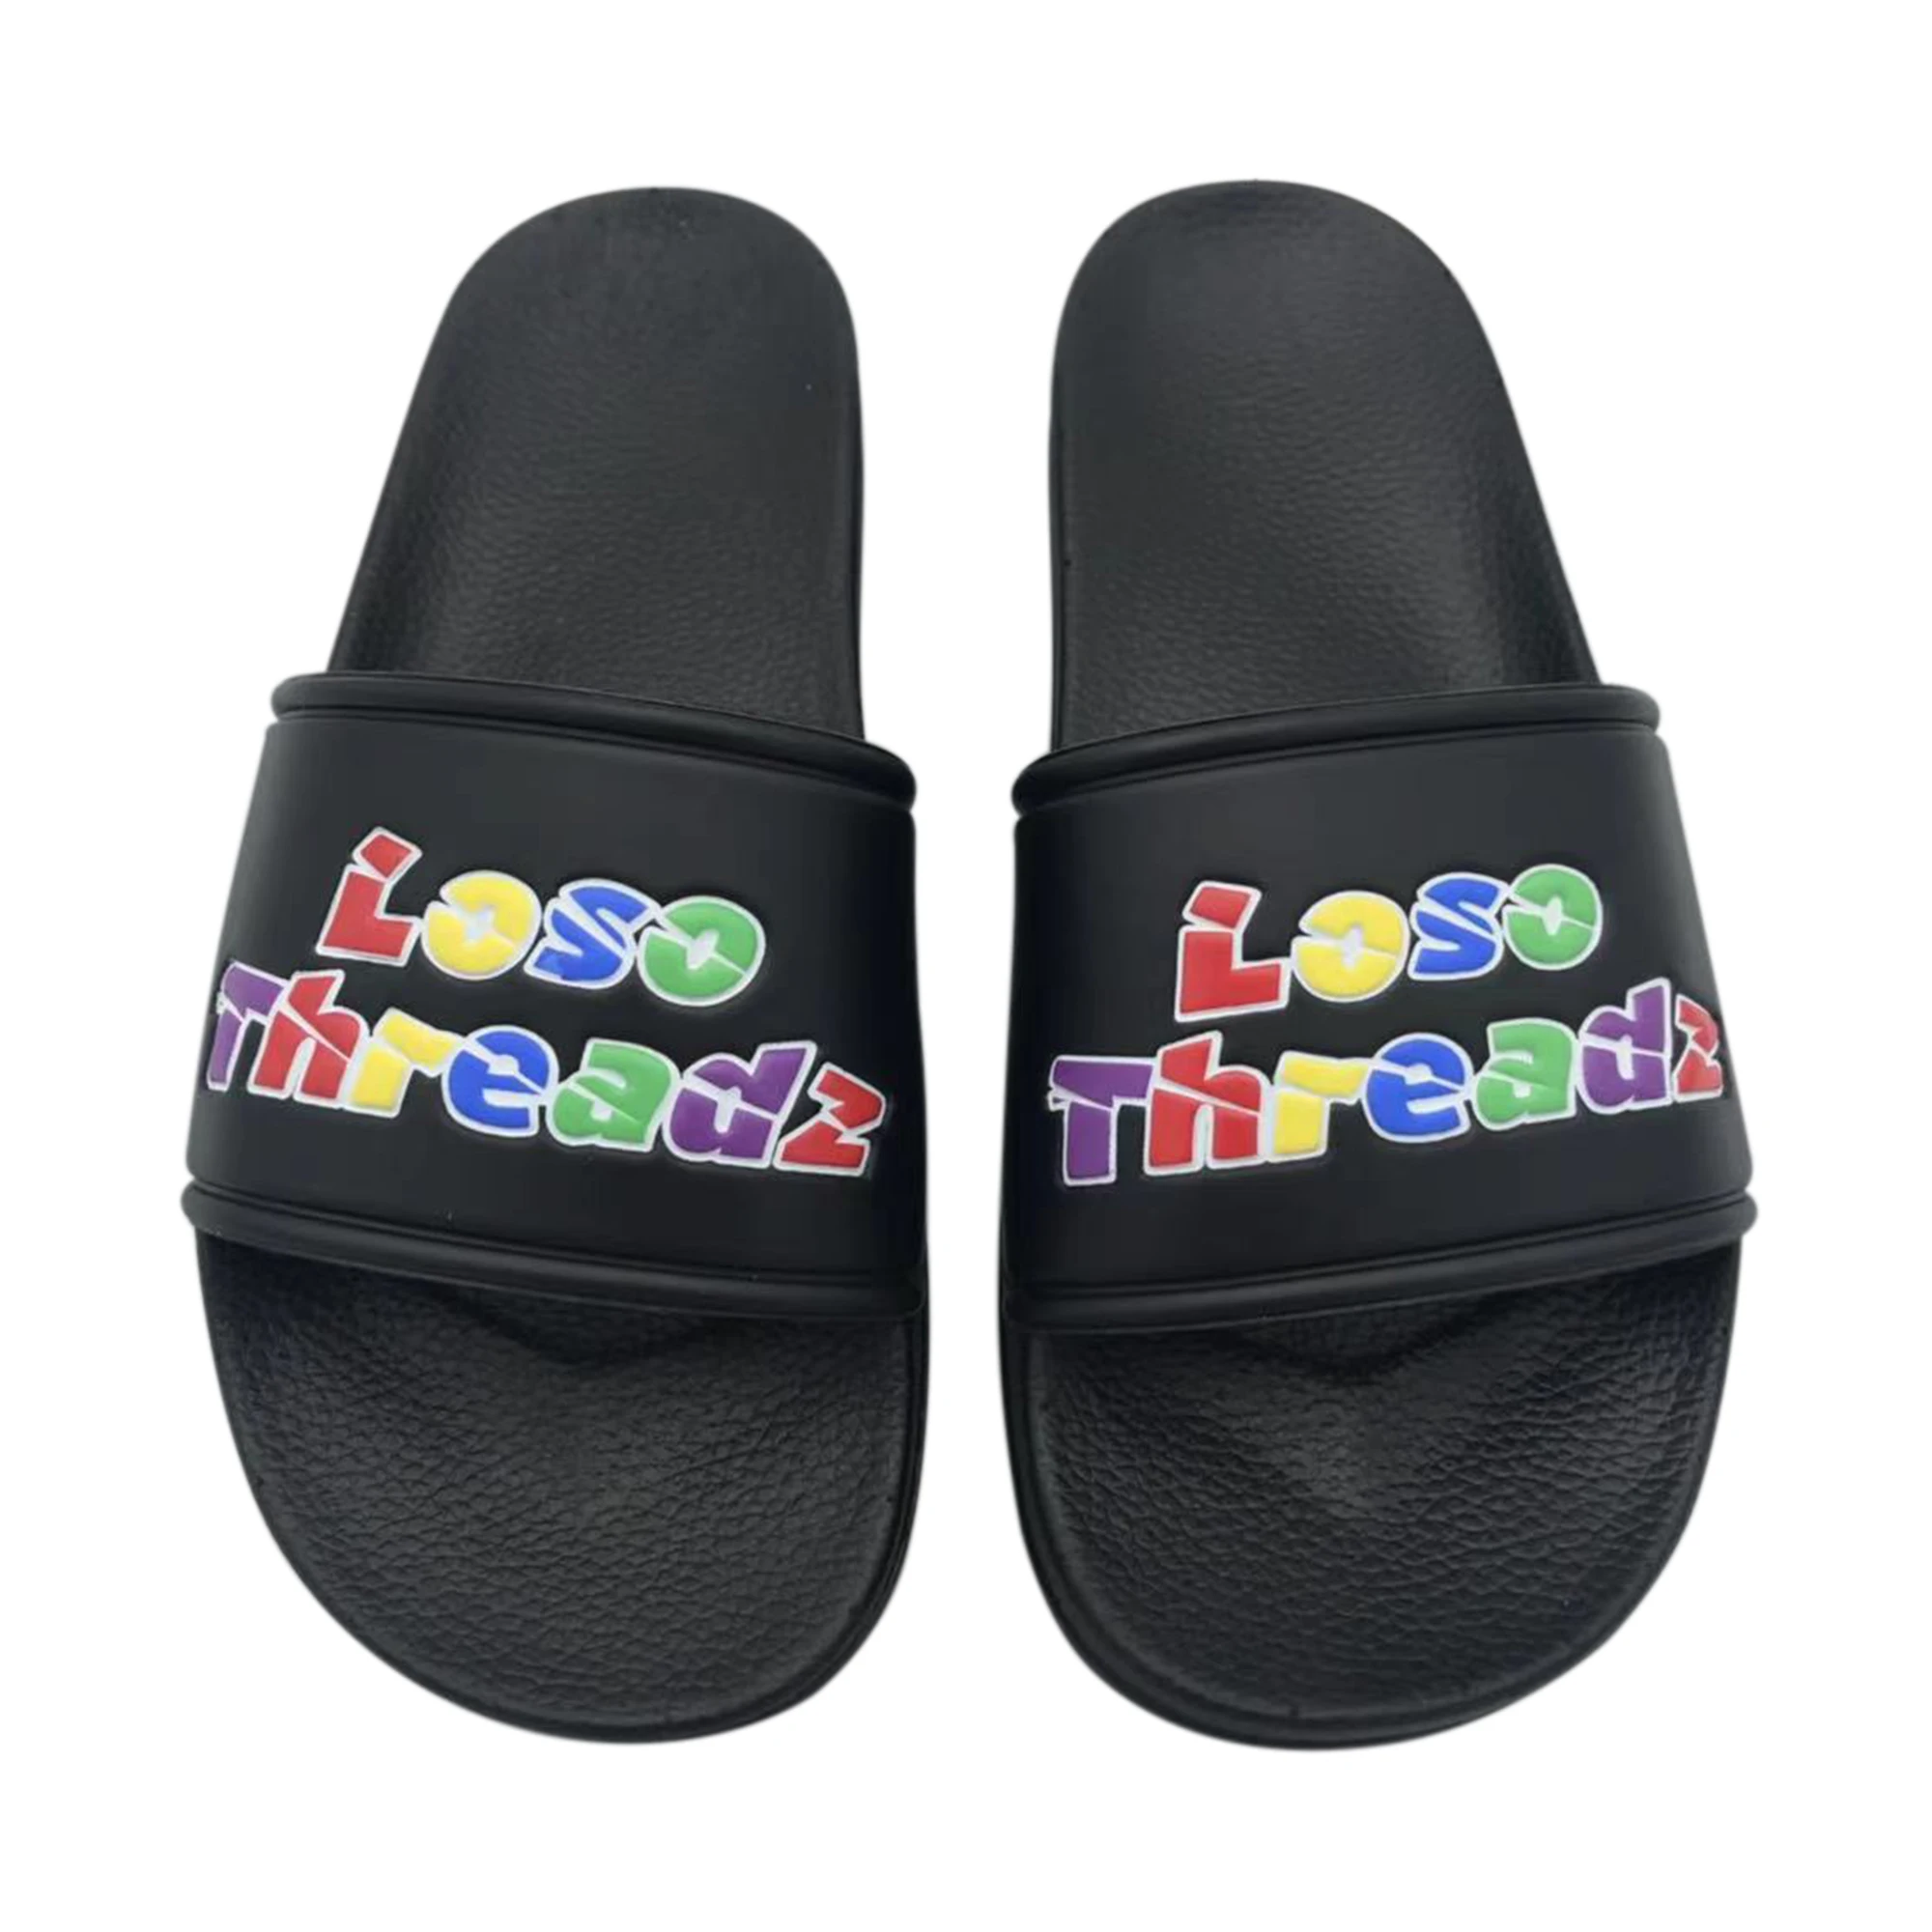 

GREAT shoes Wholesale Colorful Comfort Custom Logo high quality Rubber Blank Pool Outdoor Slide Sandal Fashion PVC Slippers, Colors